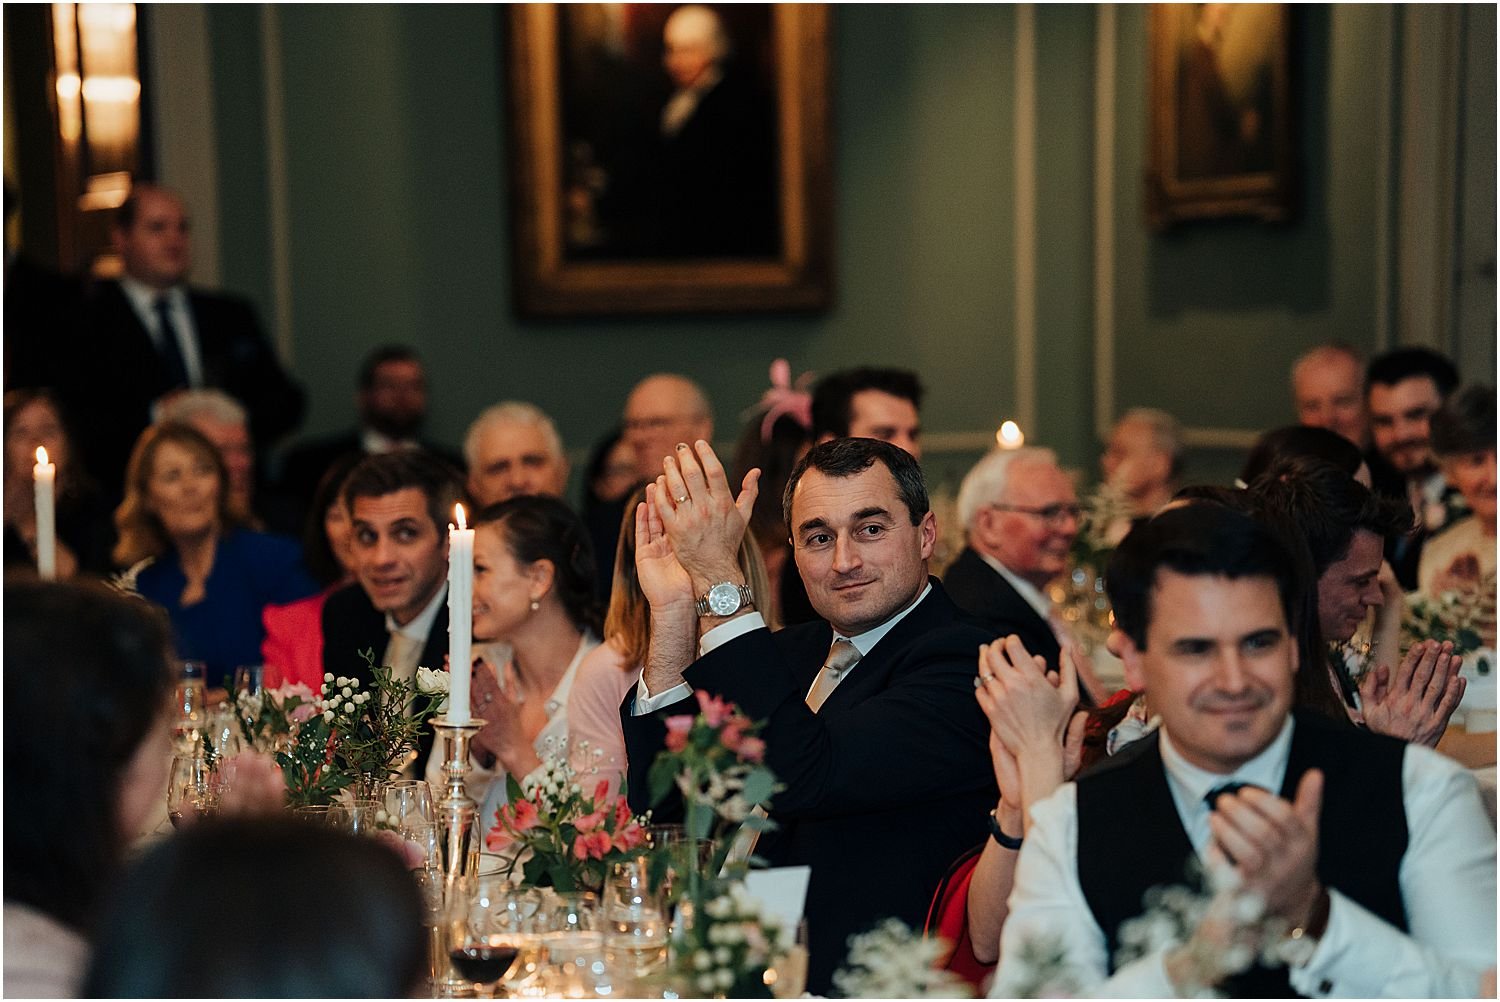 Wedding guests clapping 